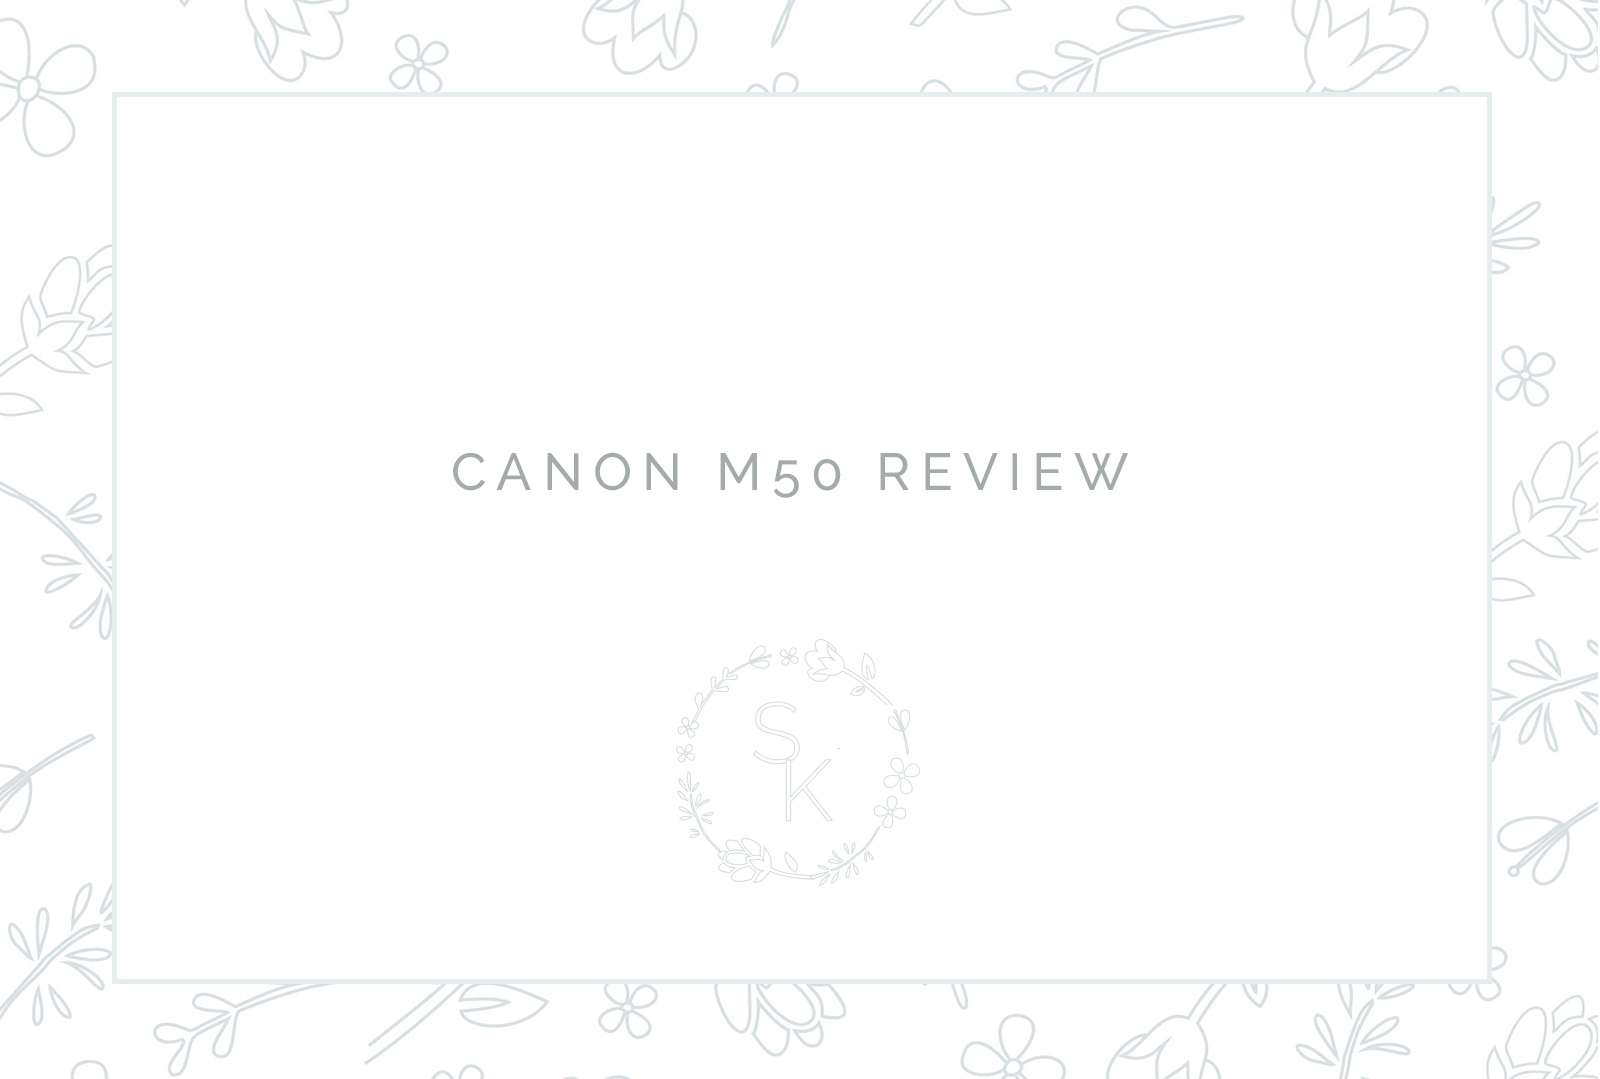 Canon M50 Review by Ohio wedding photographer and educator Stephanie Kase Photography